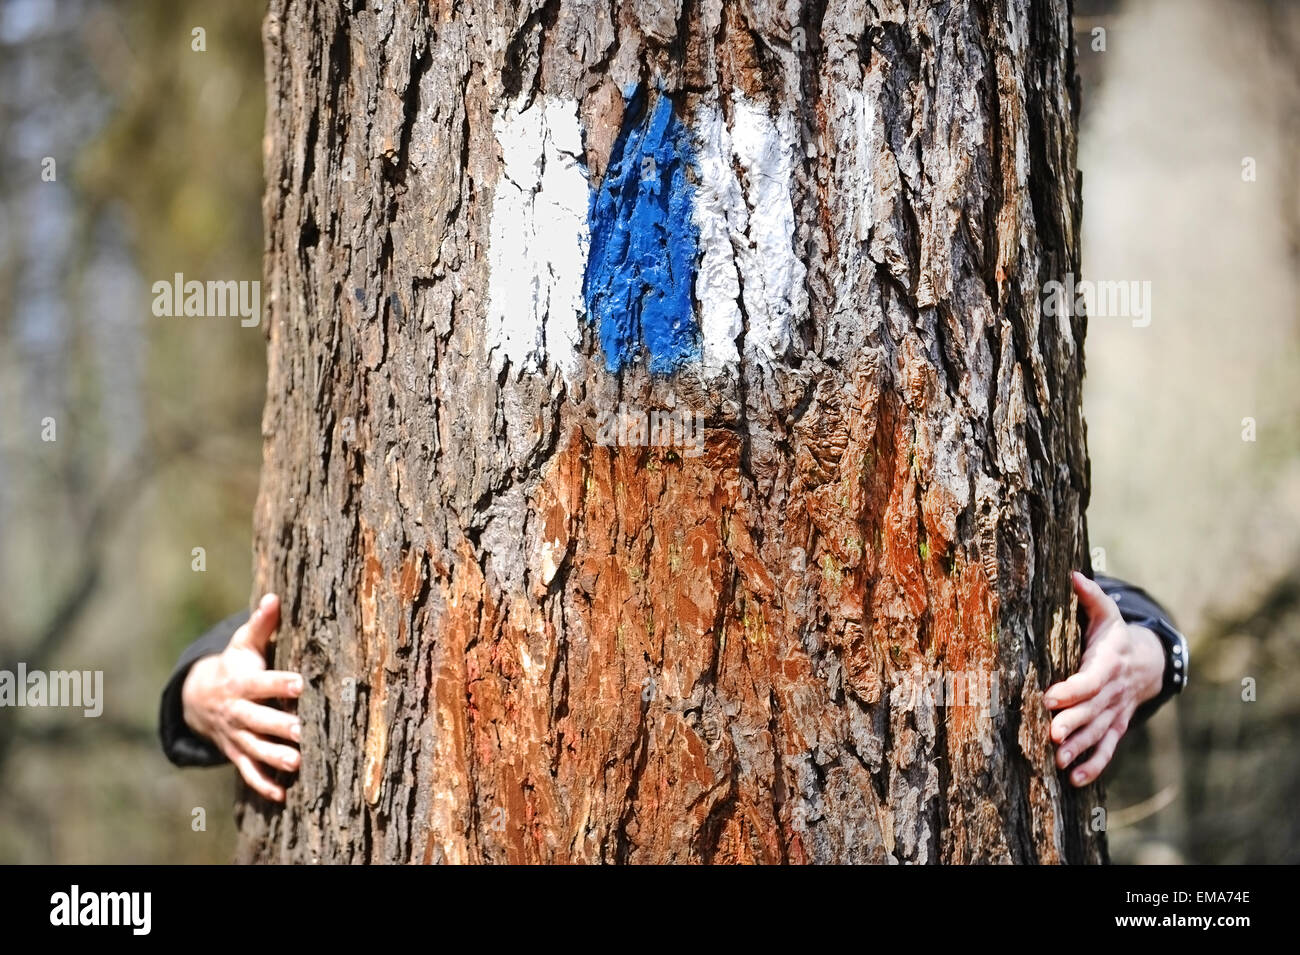 Human hands embracing a tree marked with a blue stripe hiking trail sign Stock Photo